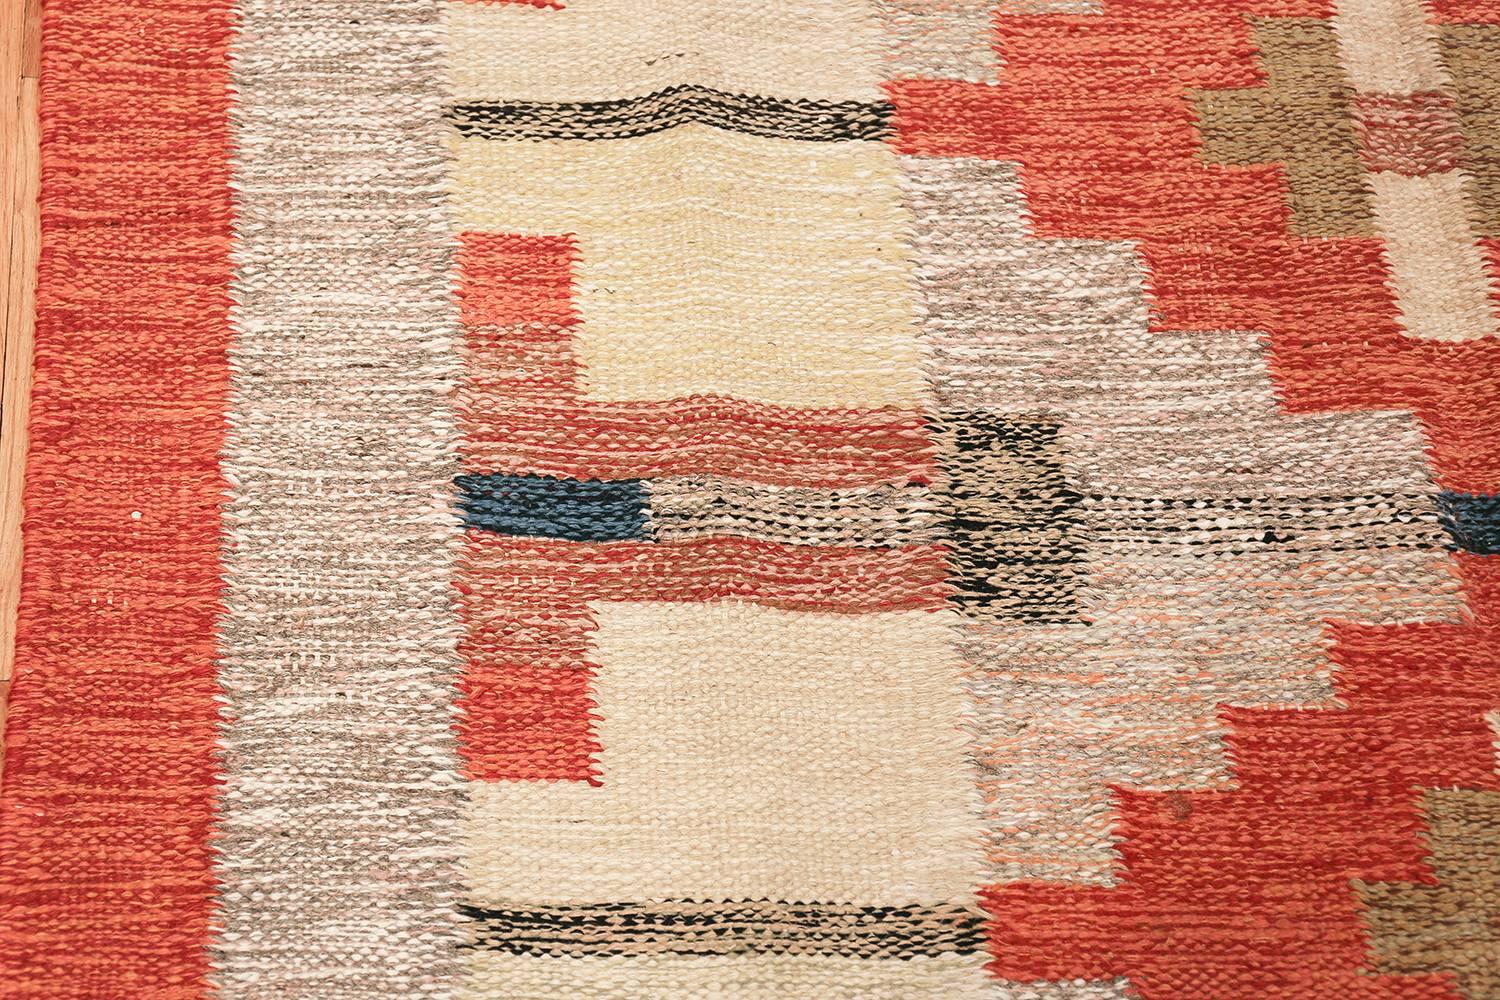 20th Century Lovely and Vibrant Vintage Swedish Kilim. Size: 6 ft x 9 ft 9 in